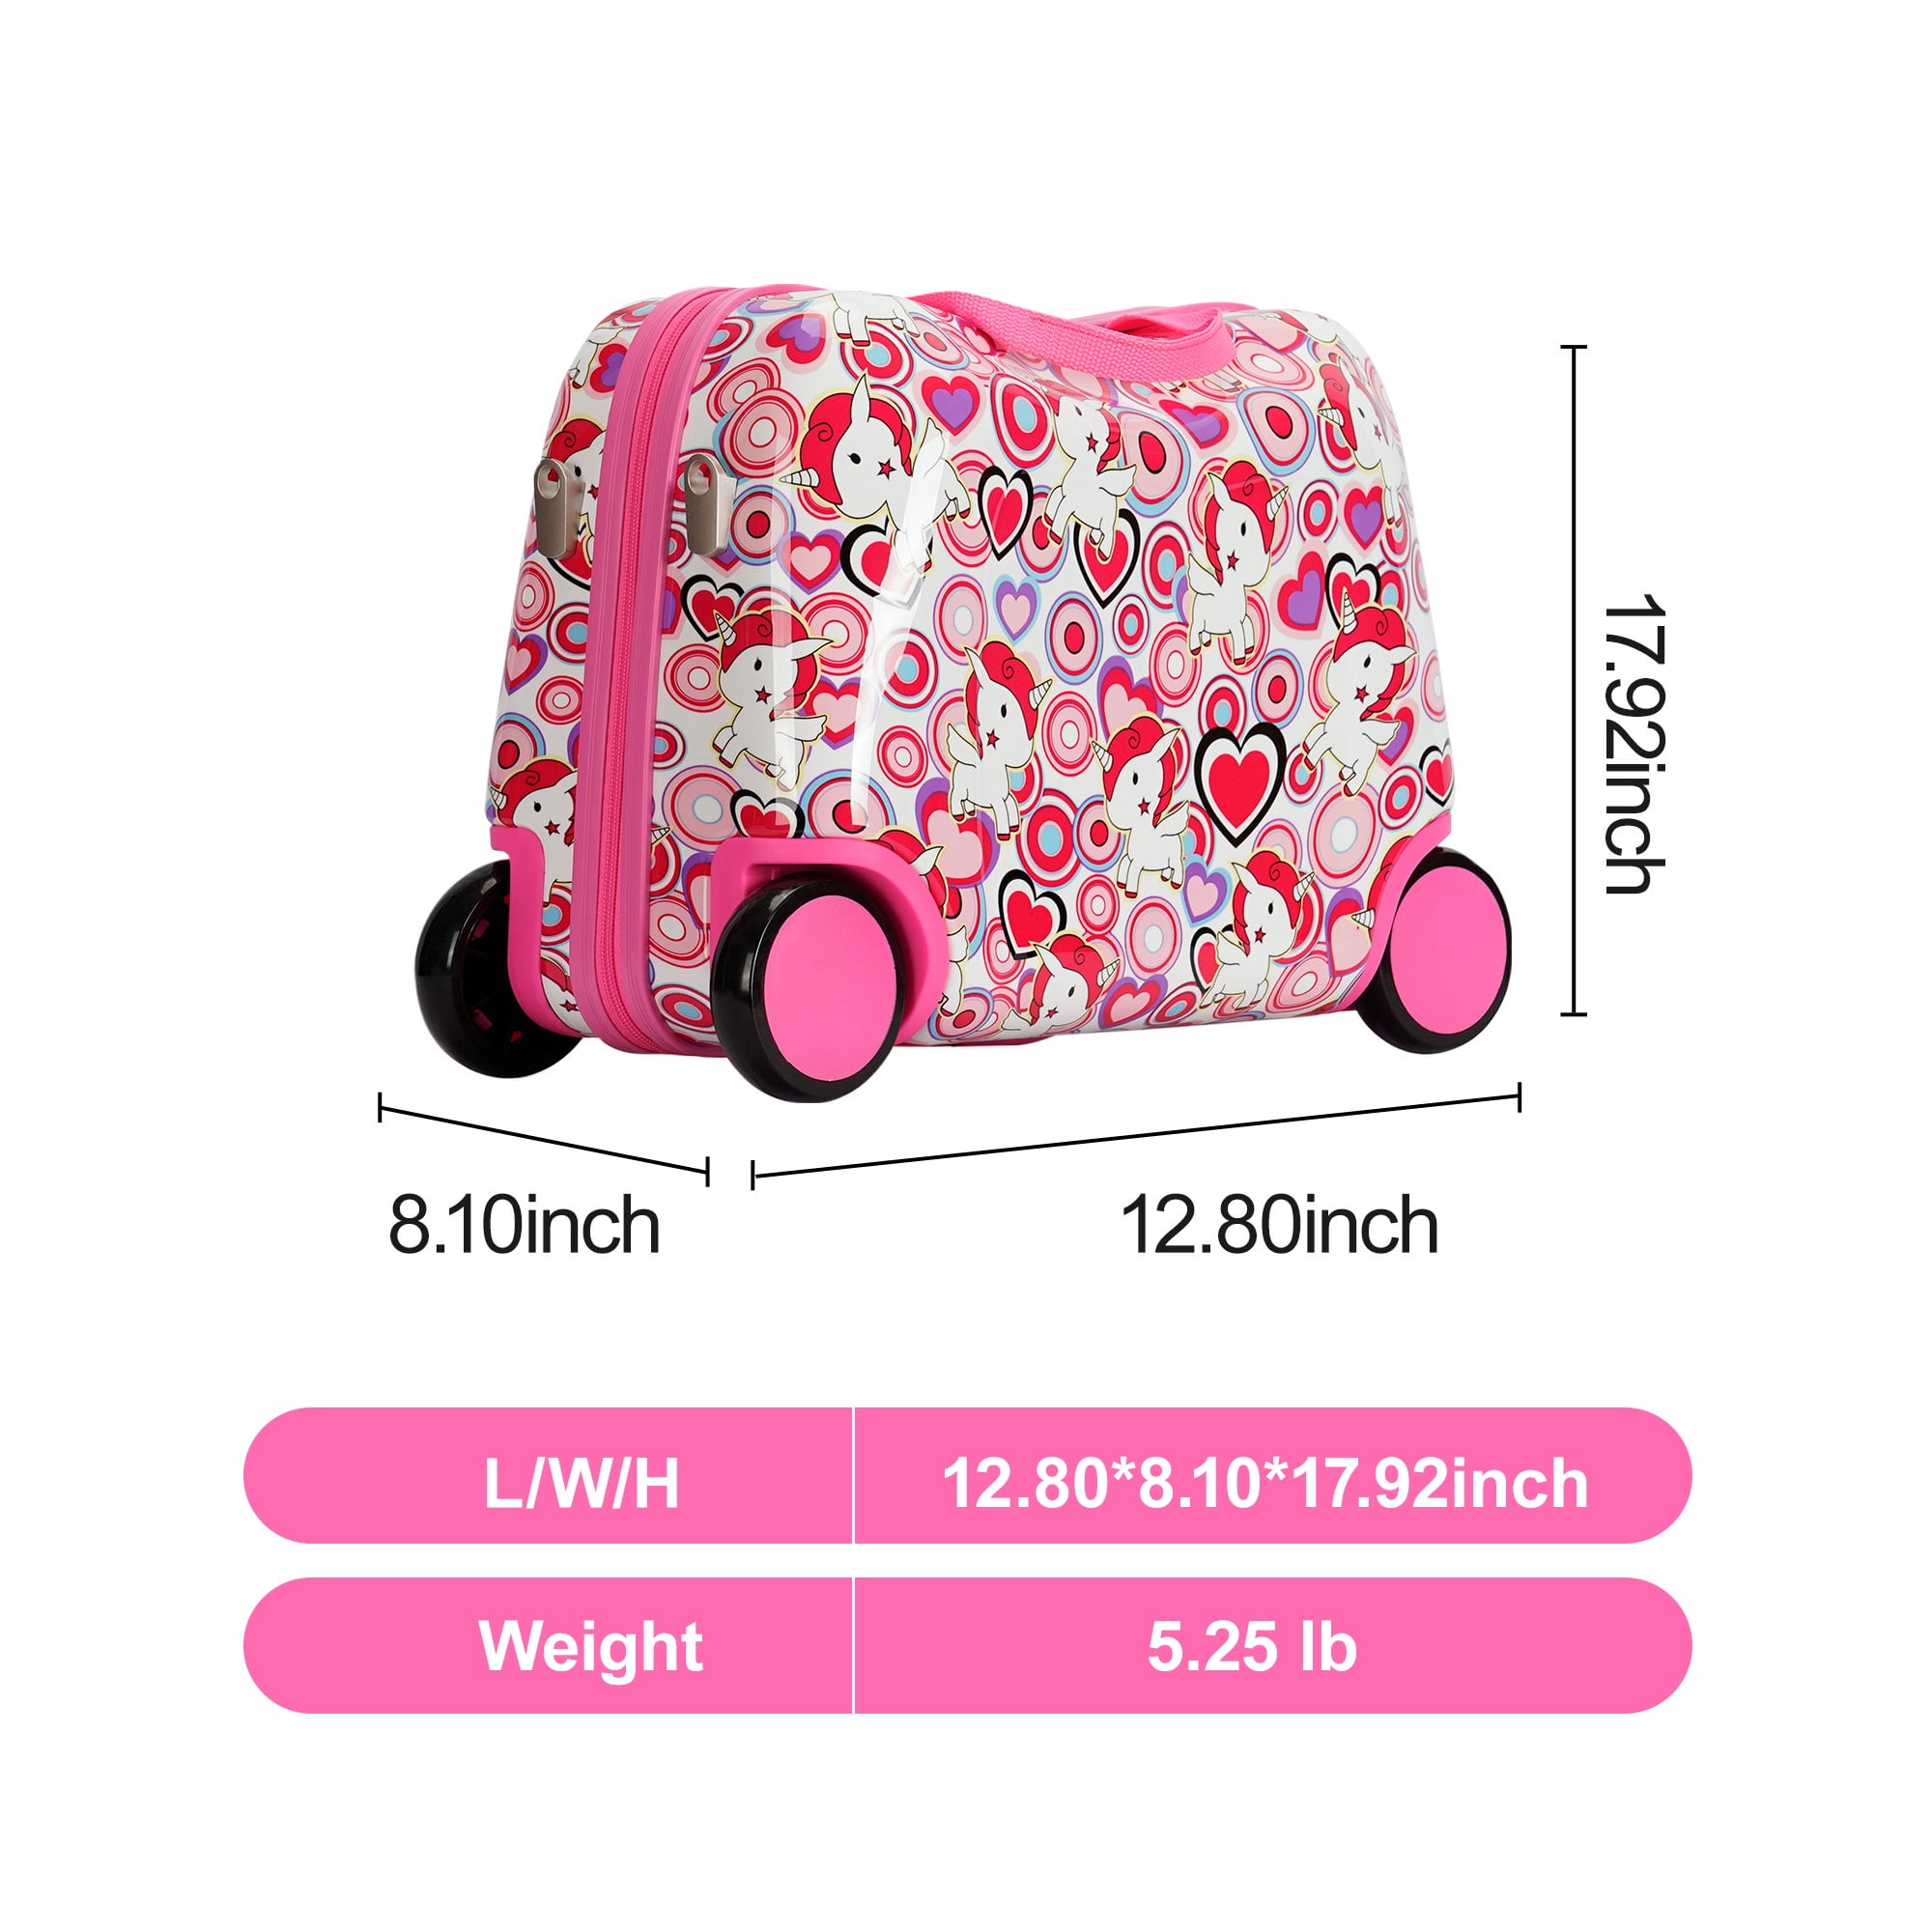 Ginza Travel 16 inch Kids Luggage Children's Trolley Case 4 Wheeled Rolling Suitcase  Luggage 